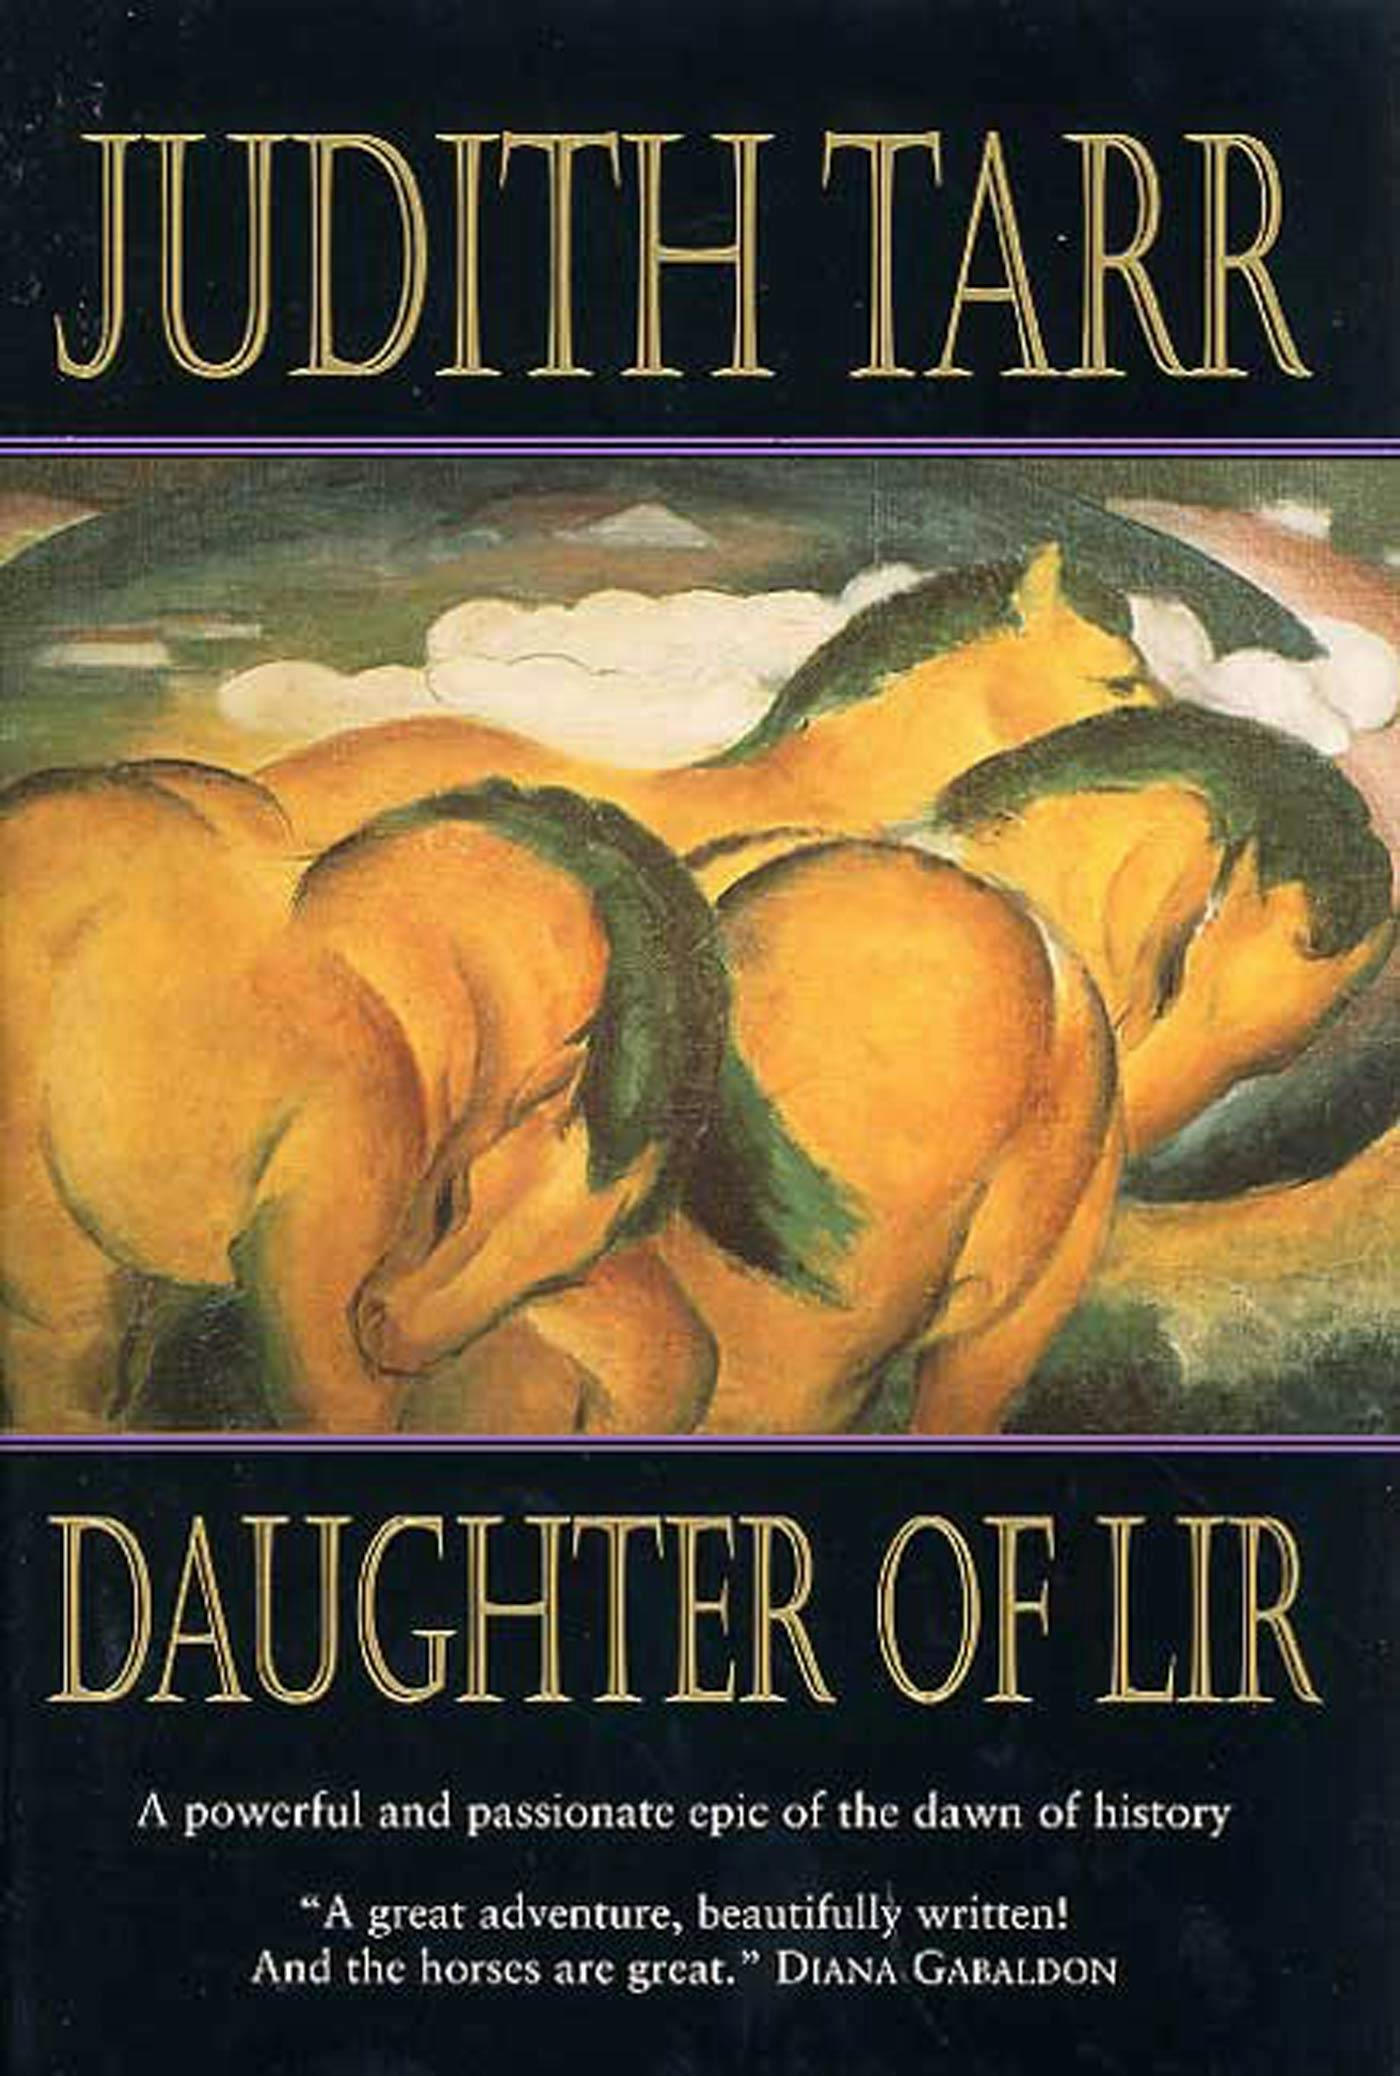 Cover for the book titled as: Daughter of Lir